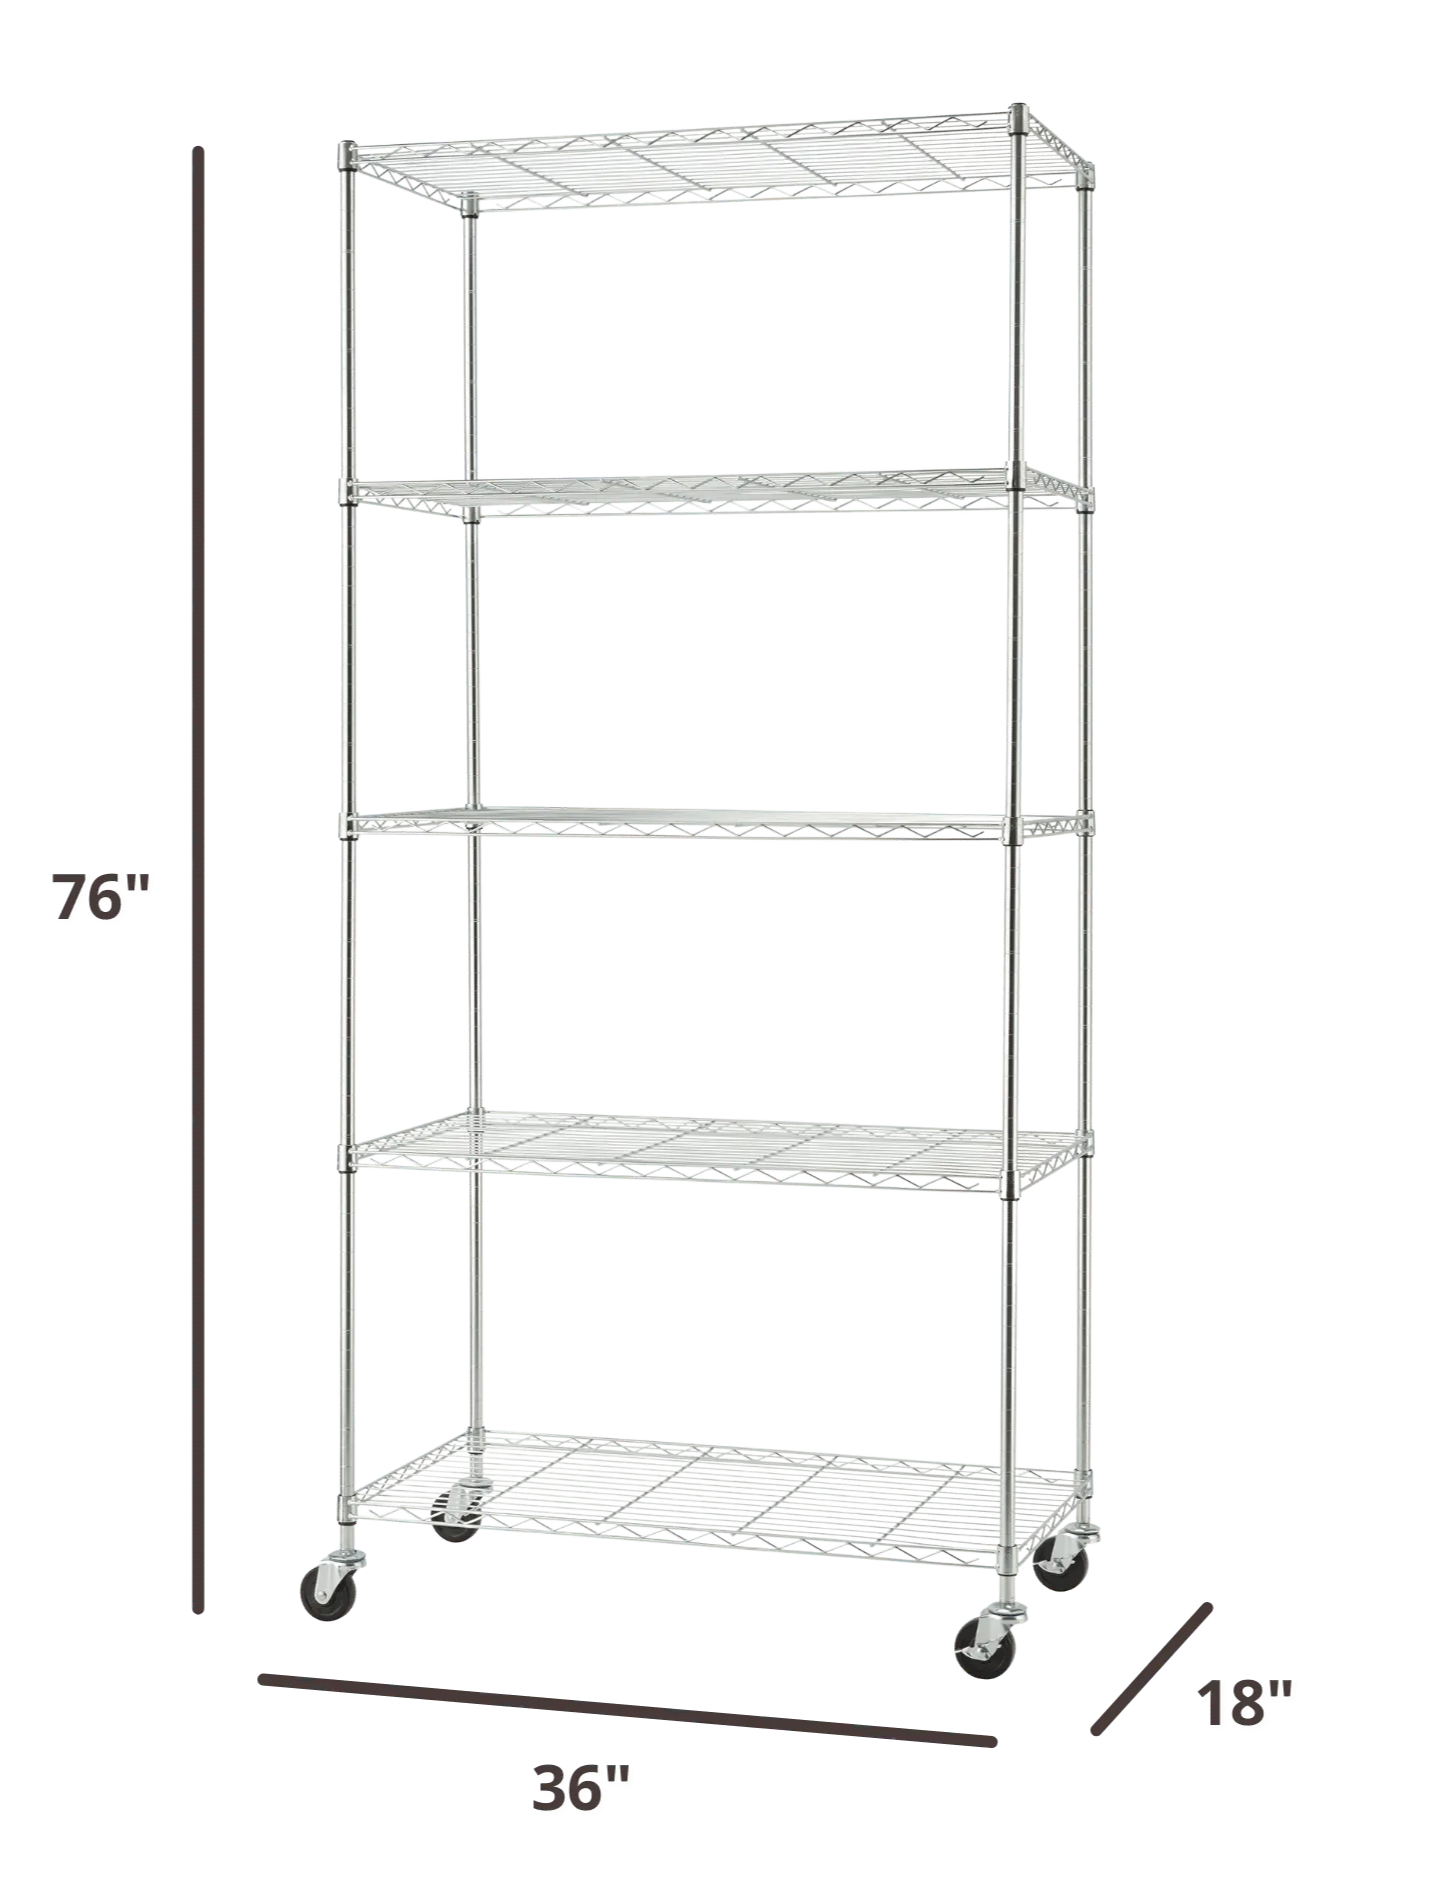 76 inches tall by 36 inches wide shelving rack